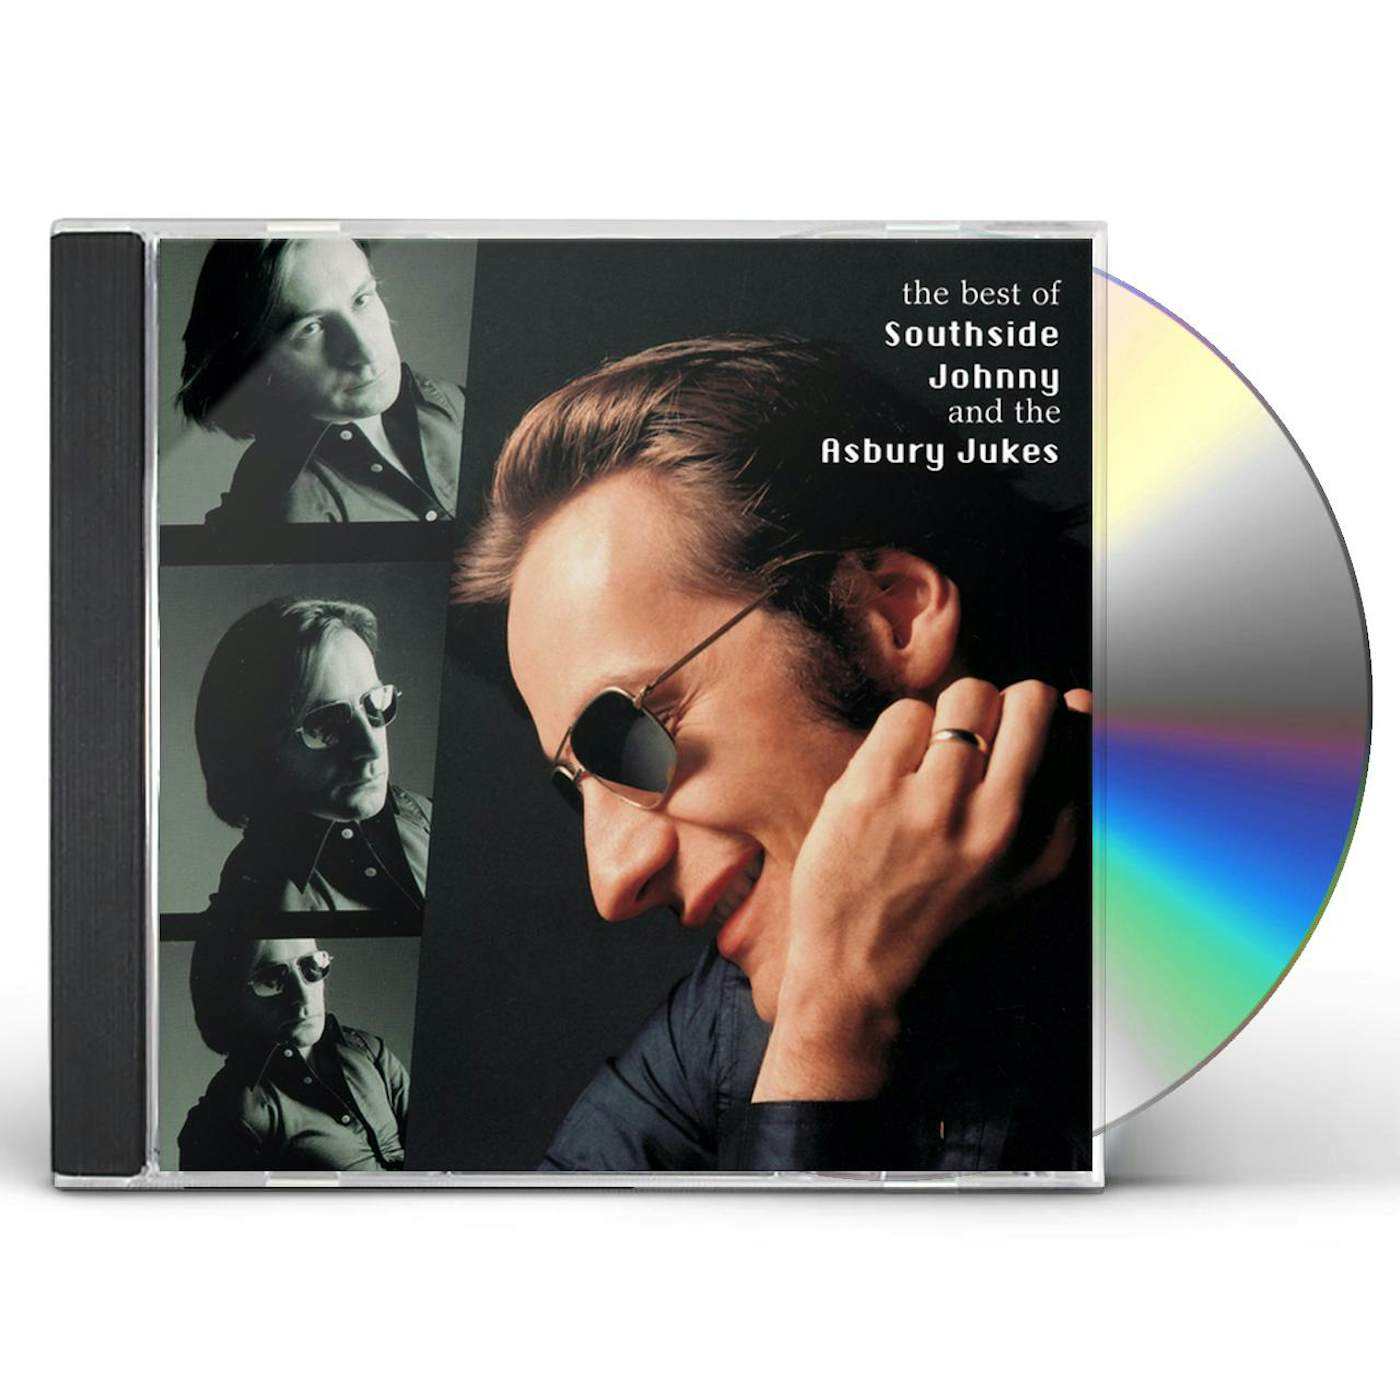 BEST OF Southside Johnny And The Asbury Jukes CD